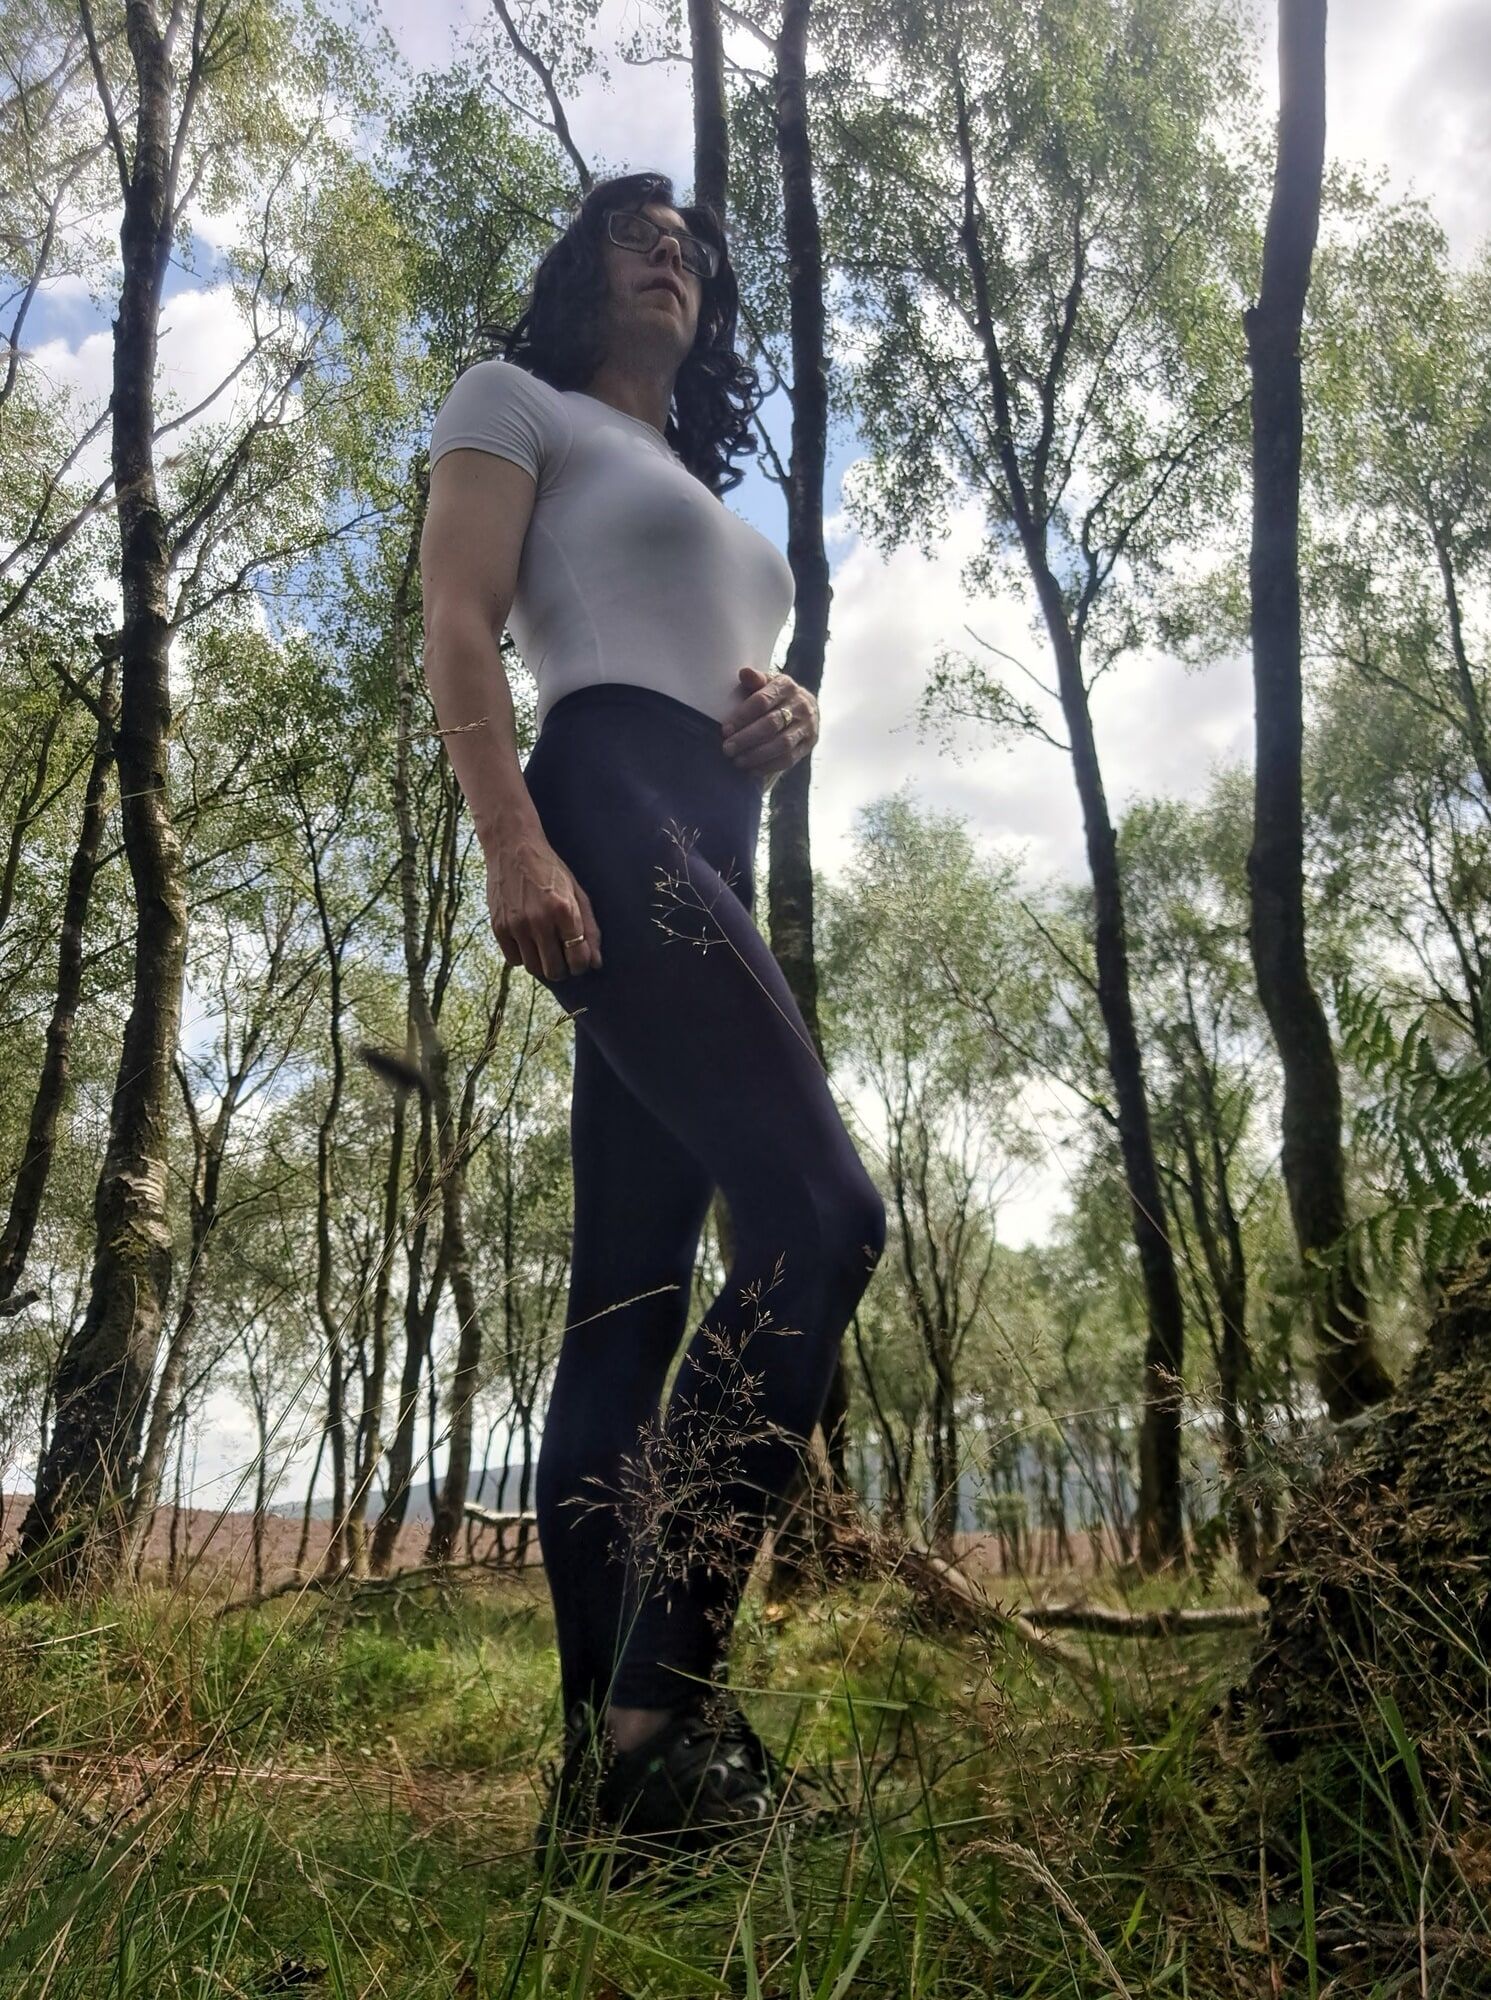 Out for a walk in leggings  